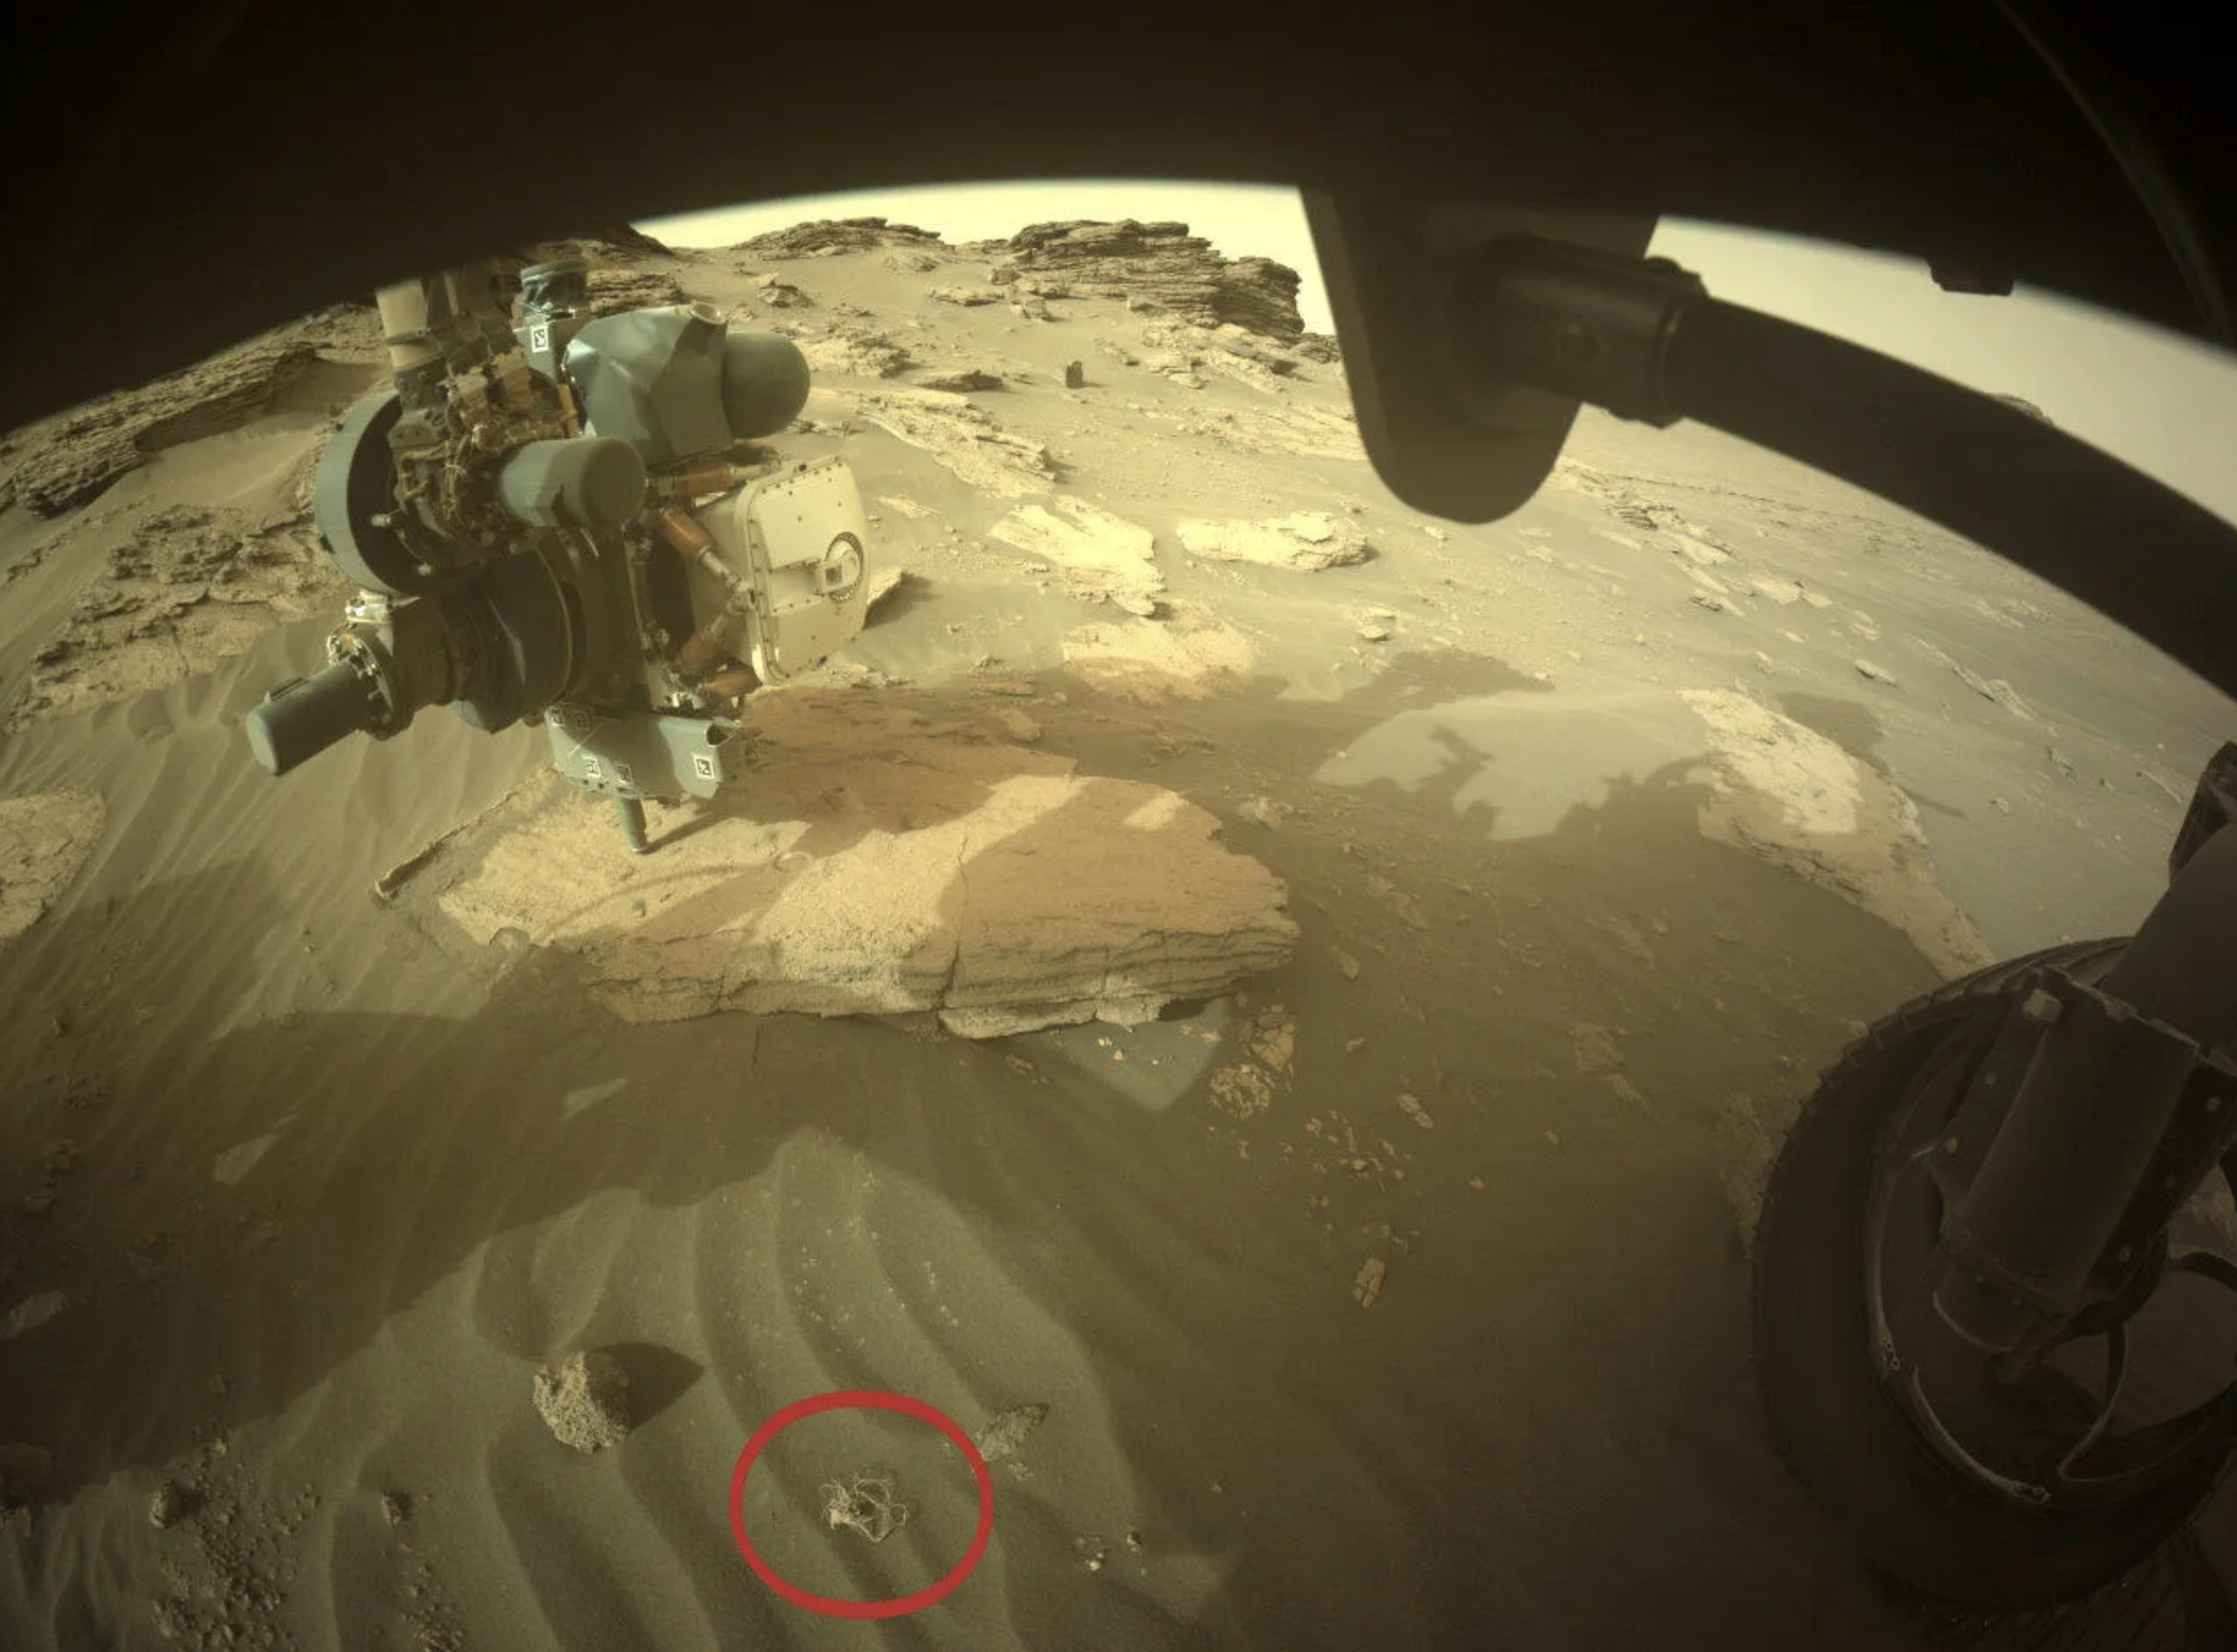 Taking a look at this image from July 12, 2022, we can see the out-of-place object (in red) in context with the wheel of the rover. NASA.